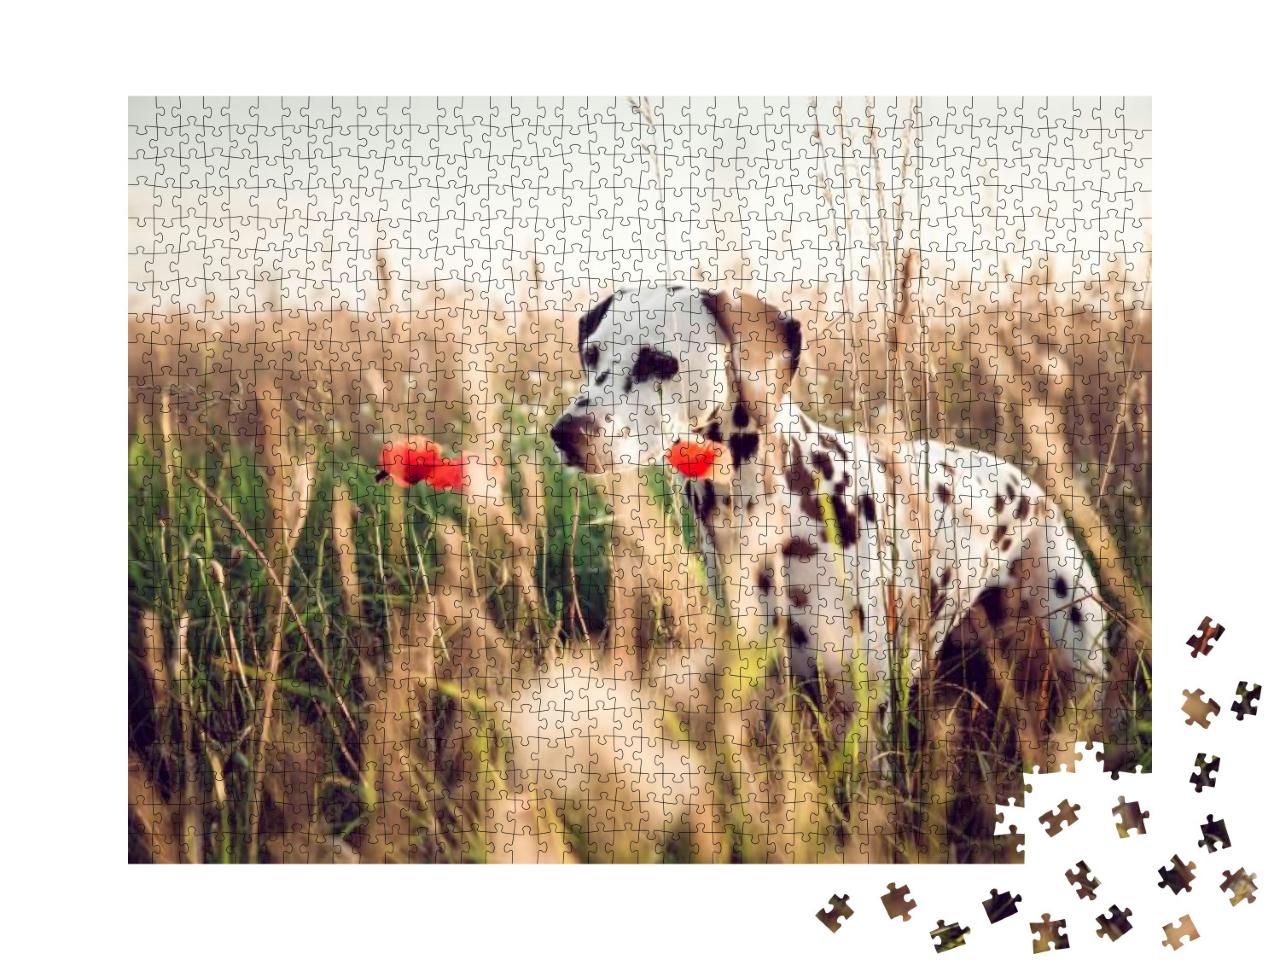 Cute Dalmatian Dog in a Cornfield... Jigsaw Puzzle with 1000 pieces